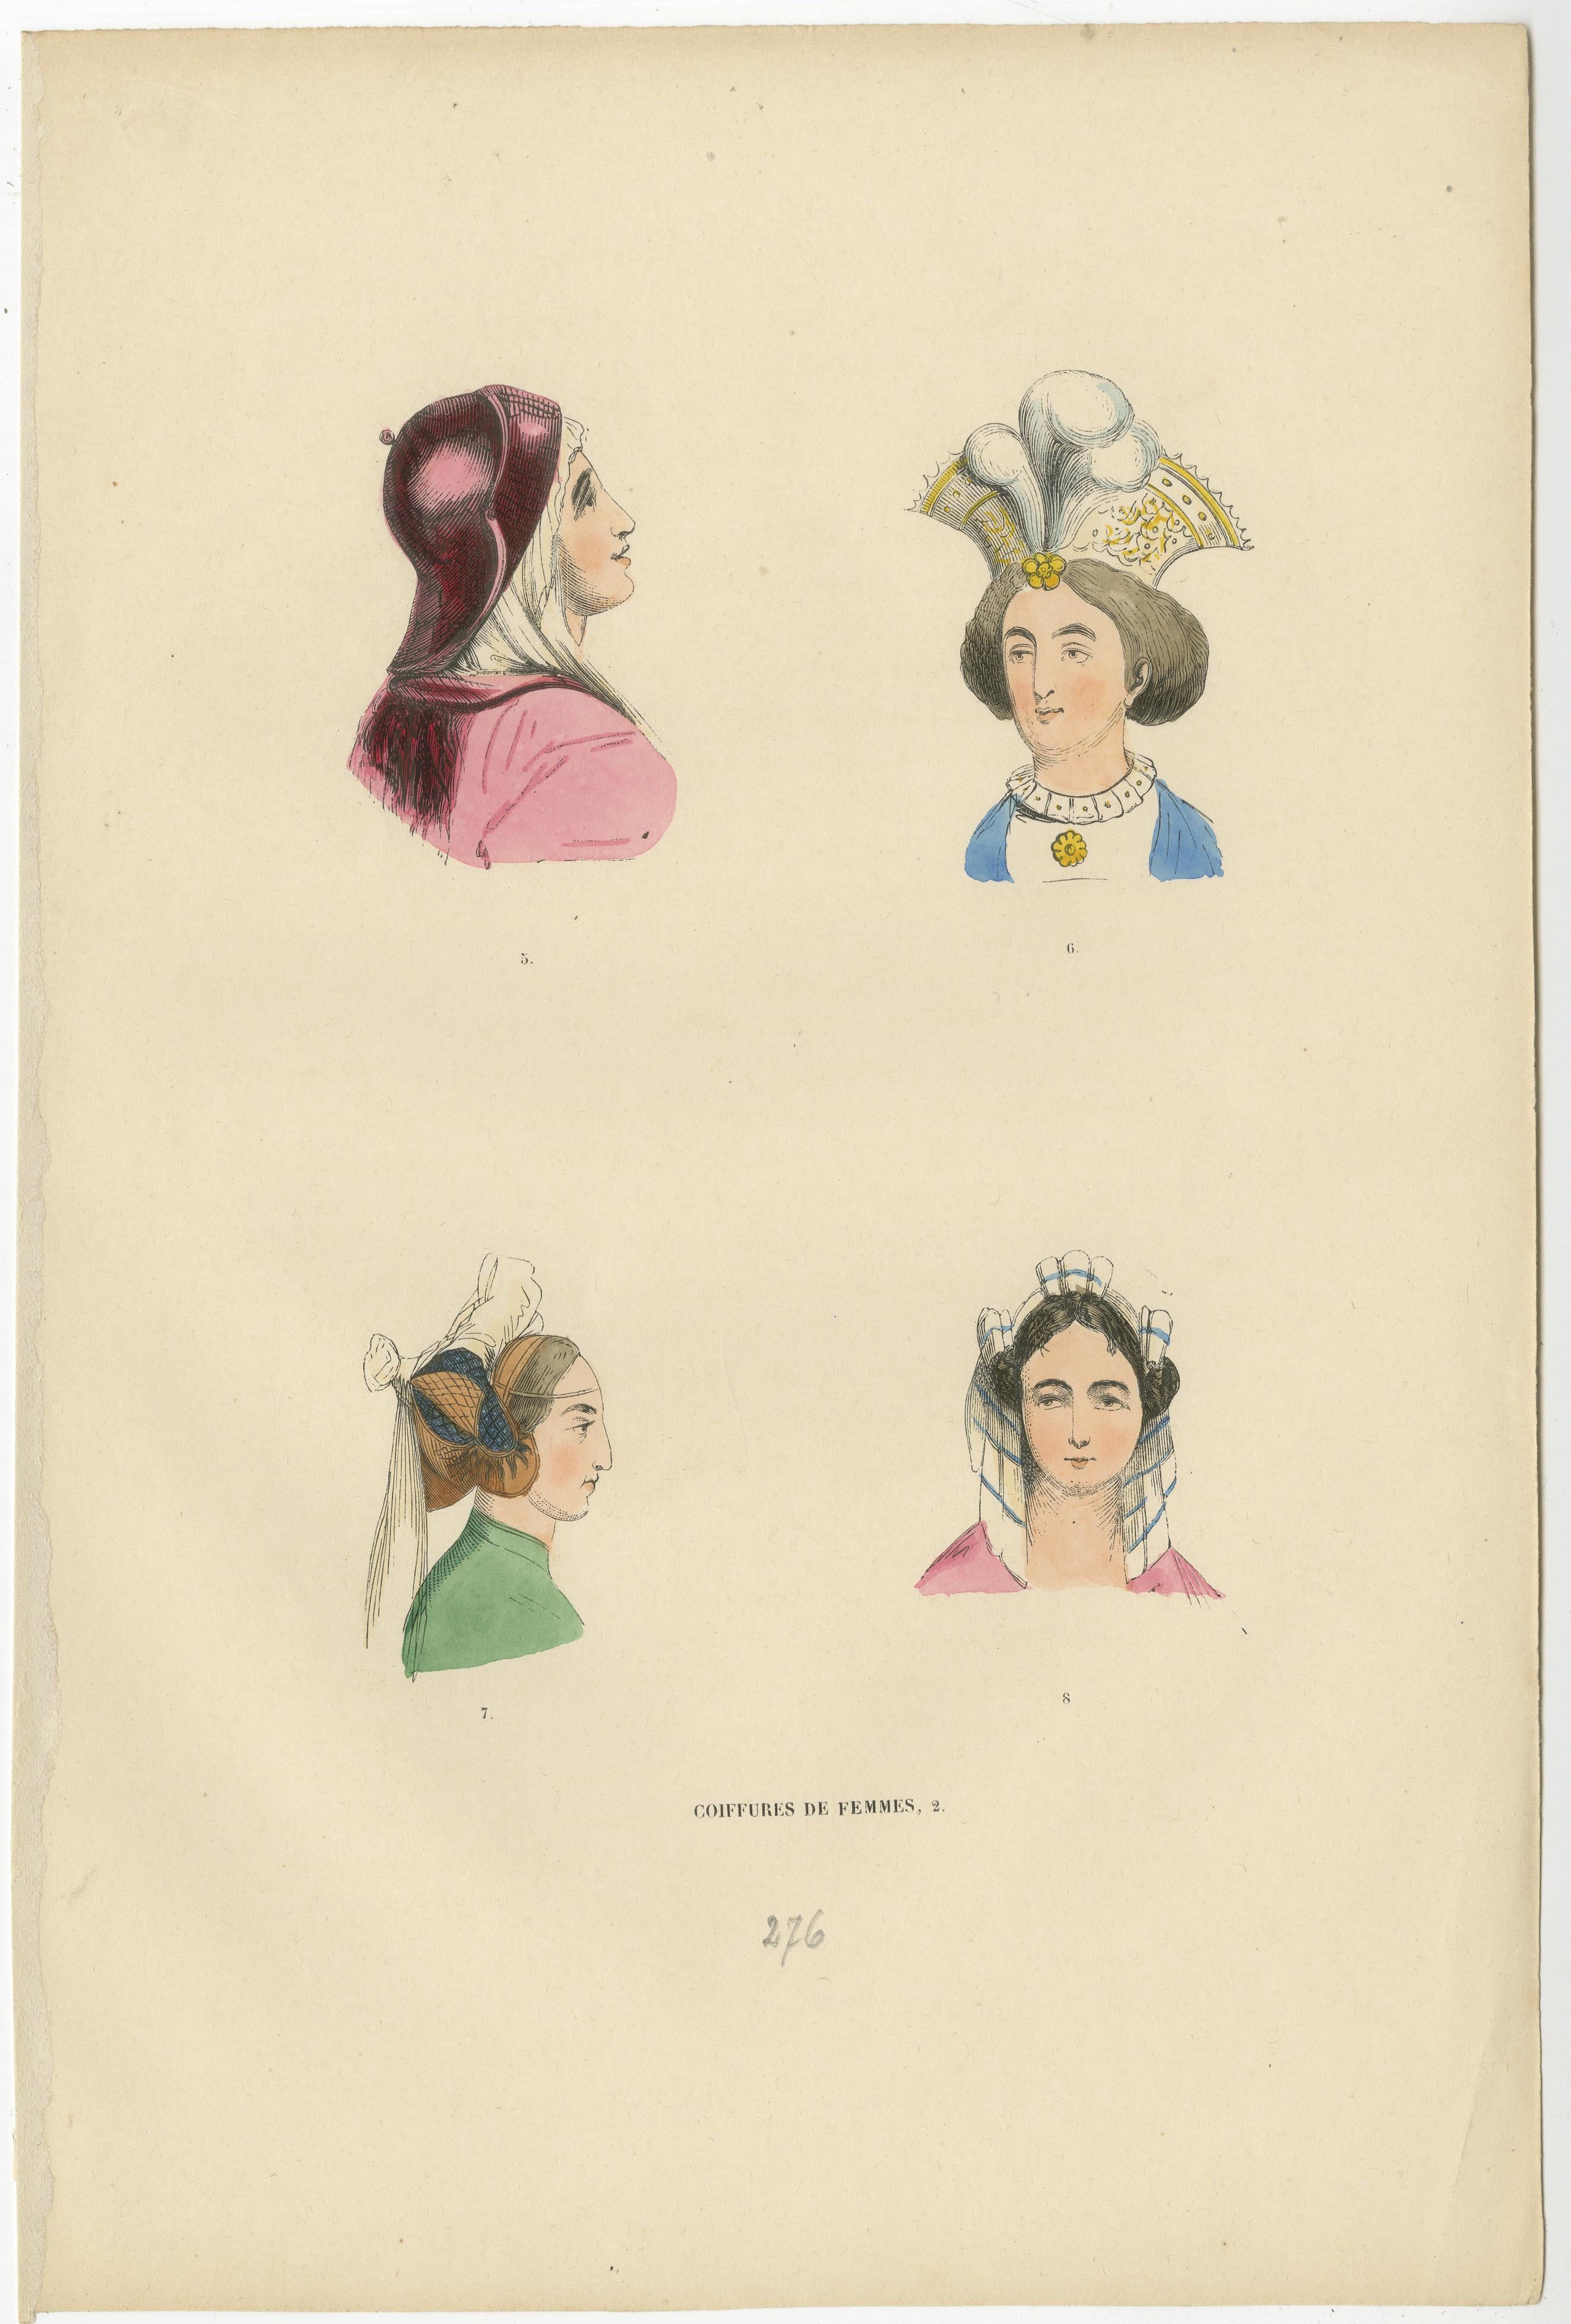 These exquisite lithographs from the 